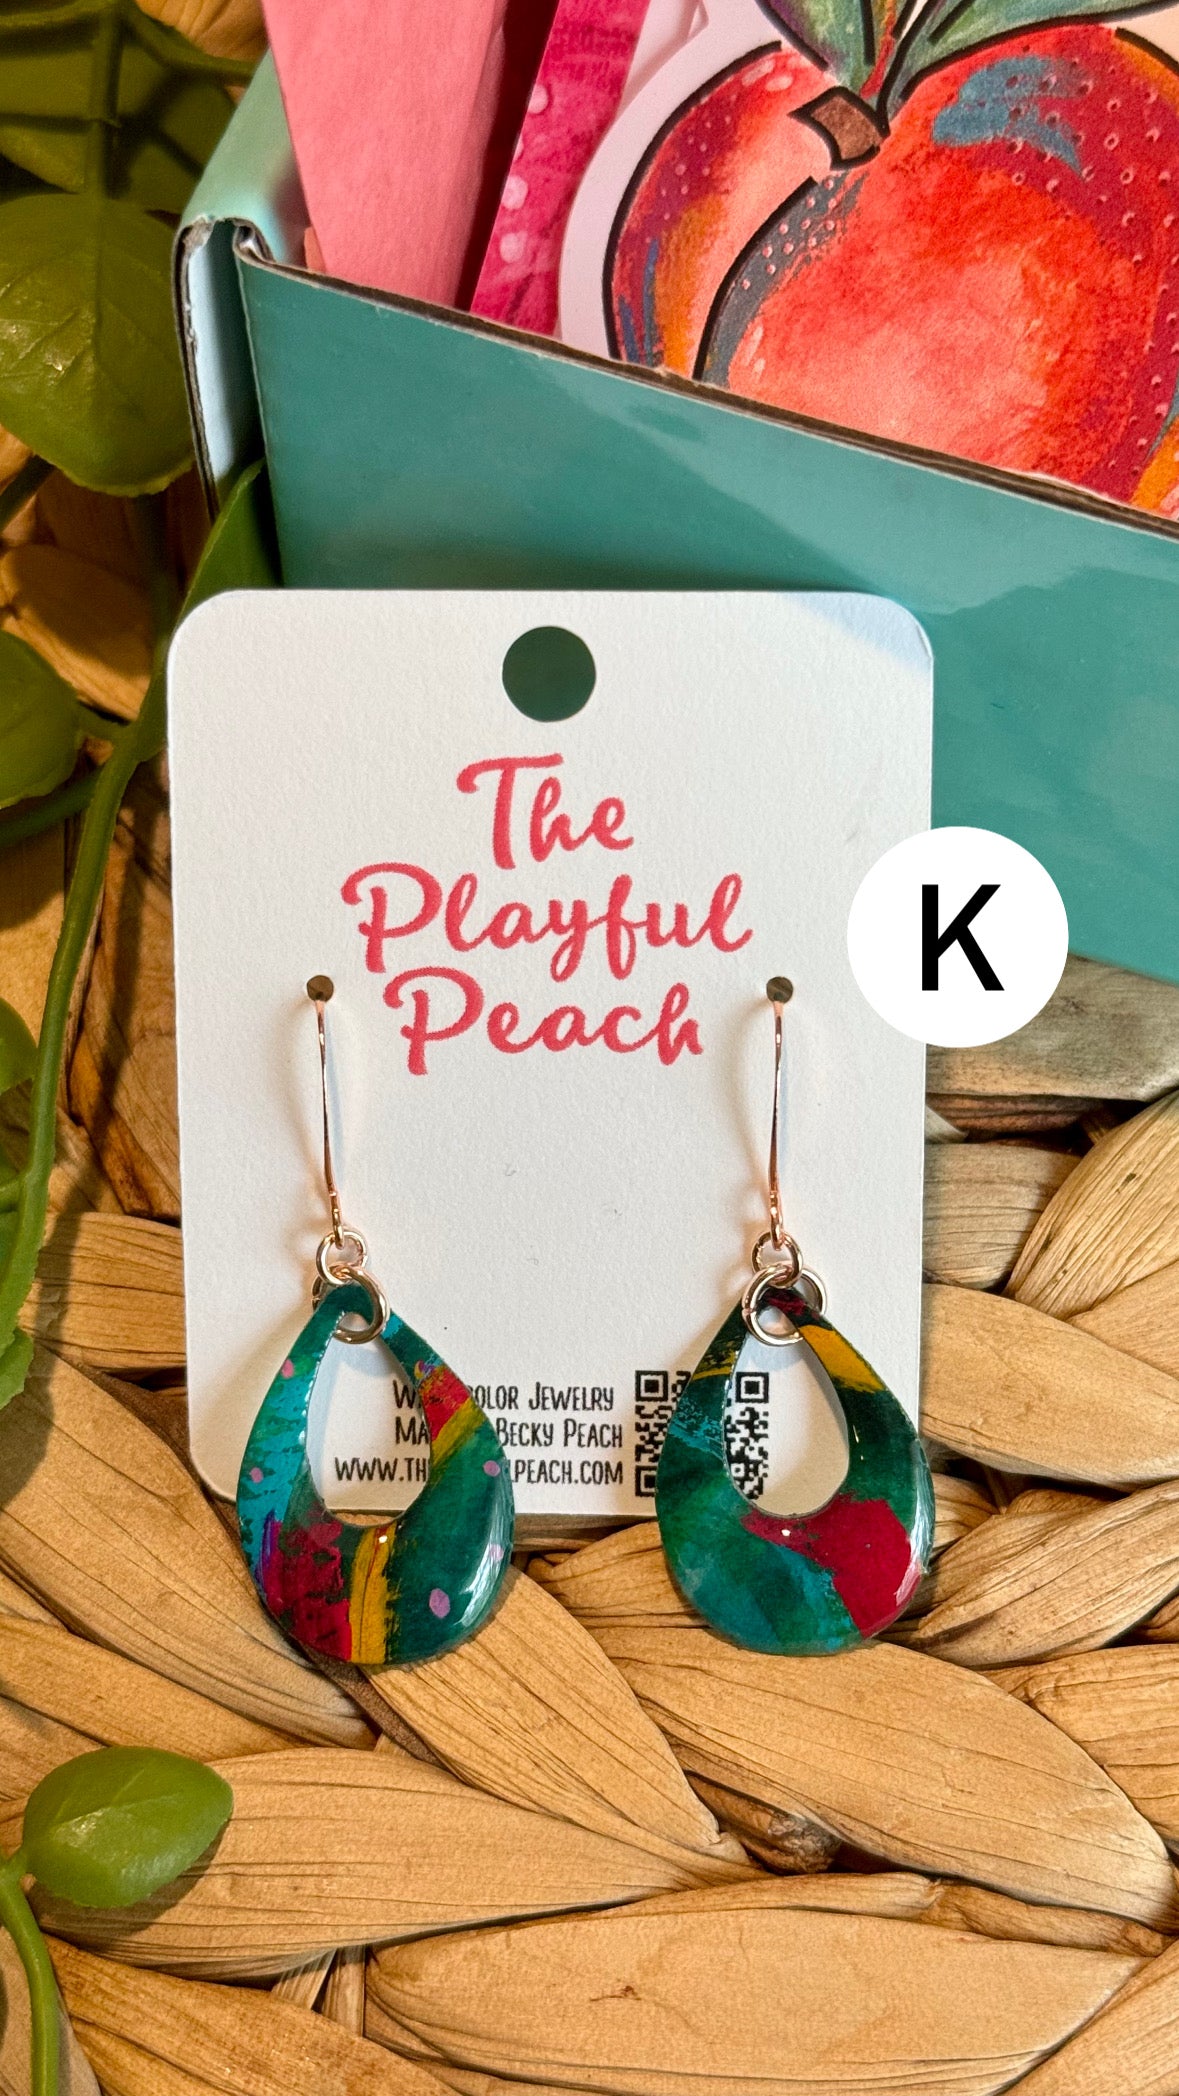 The Playful Peach Subscription Box- You Pick!